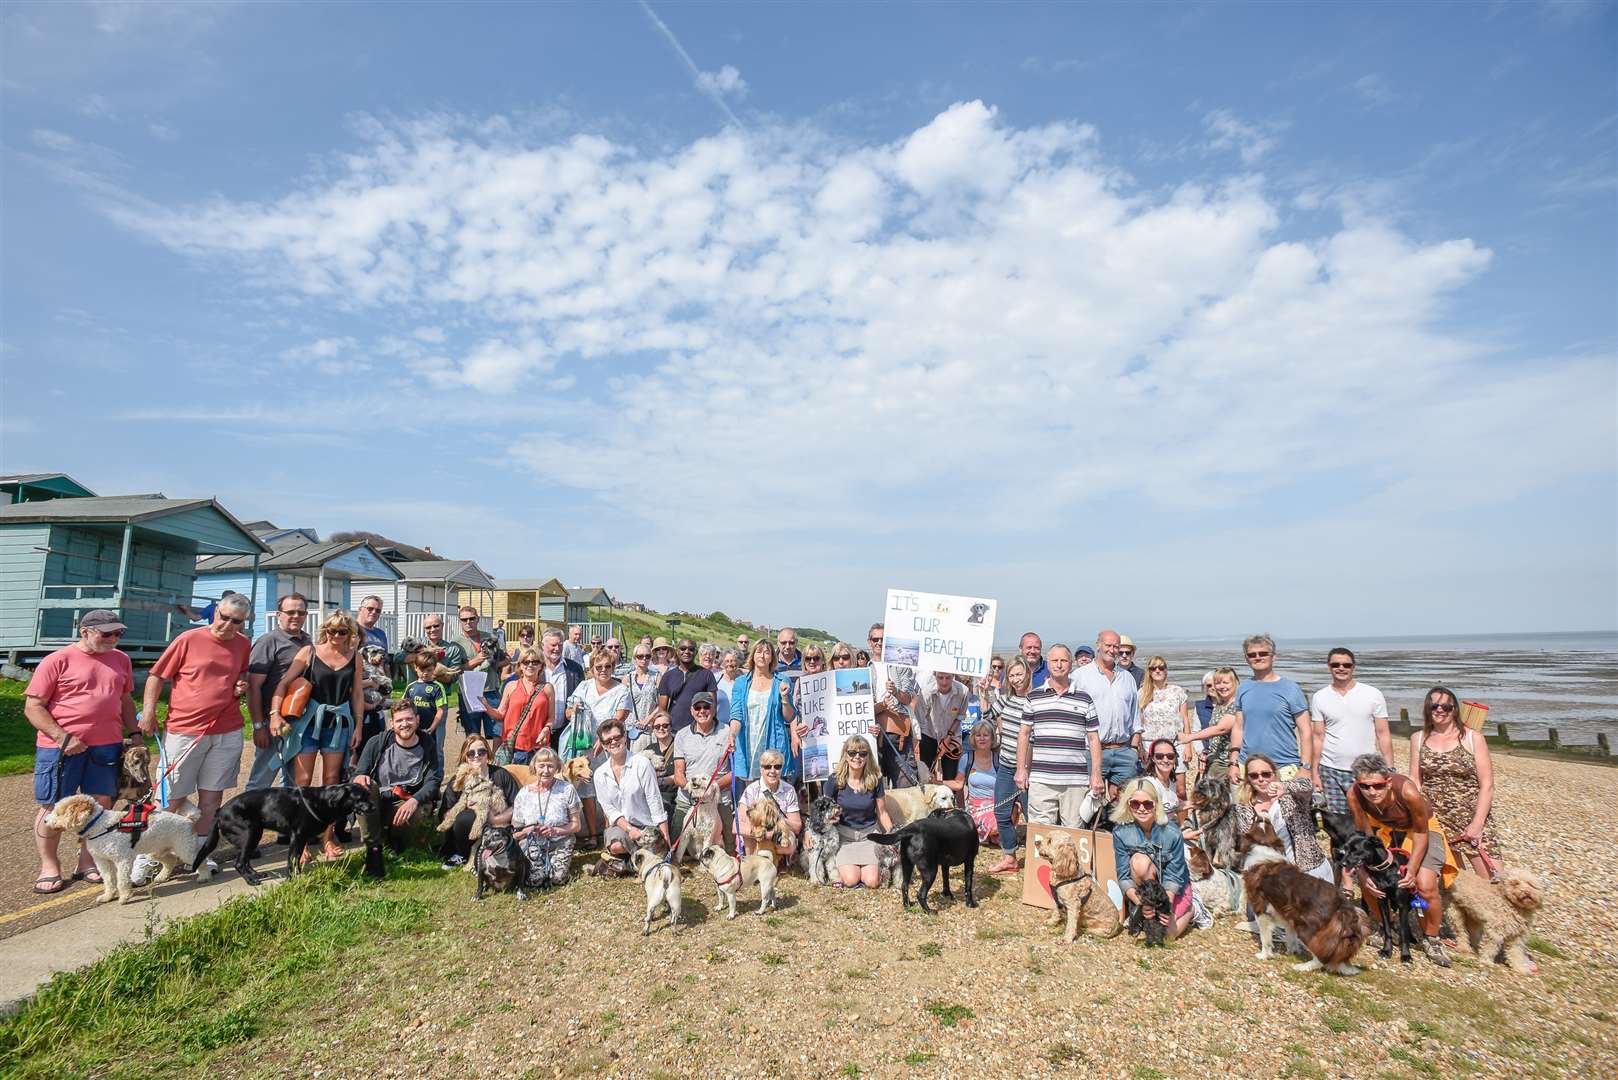 Dog walkers protest against proposal to ban dogs from the beach